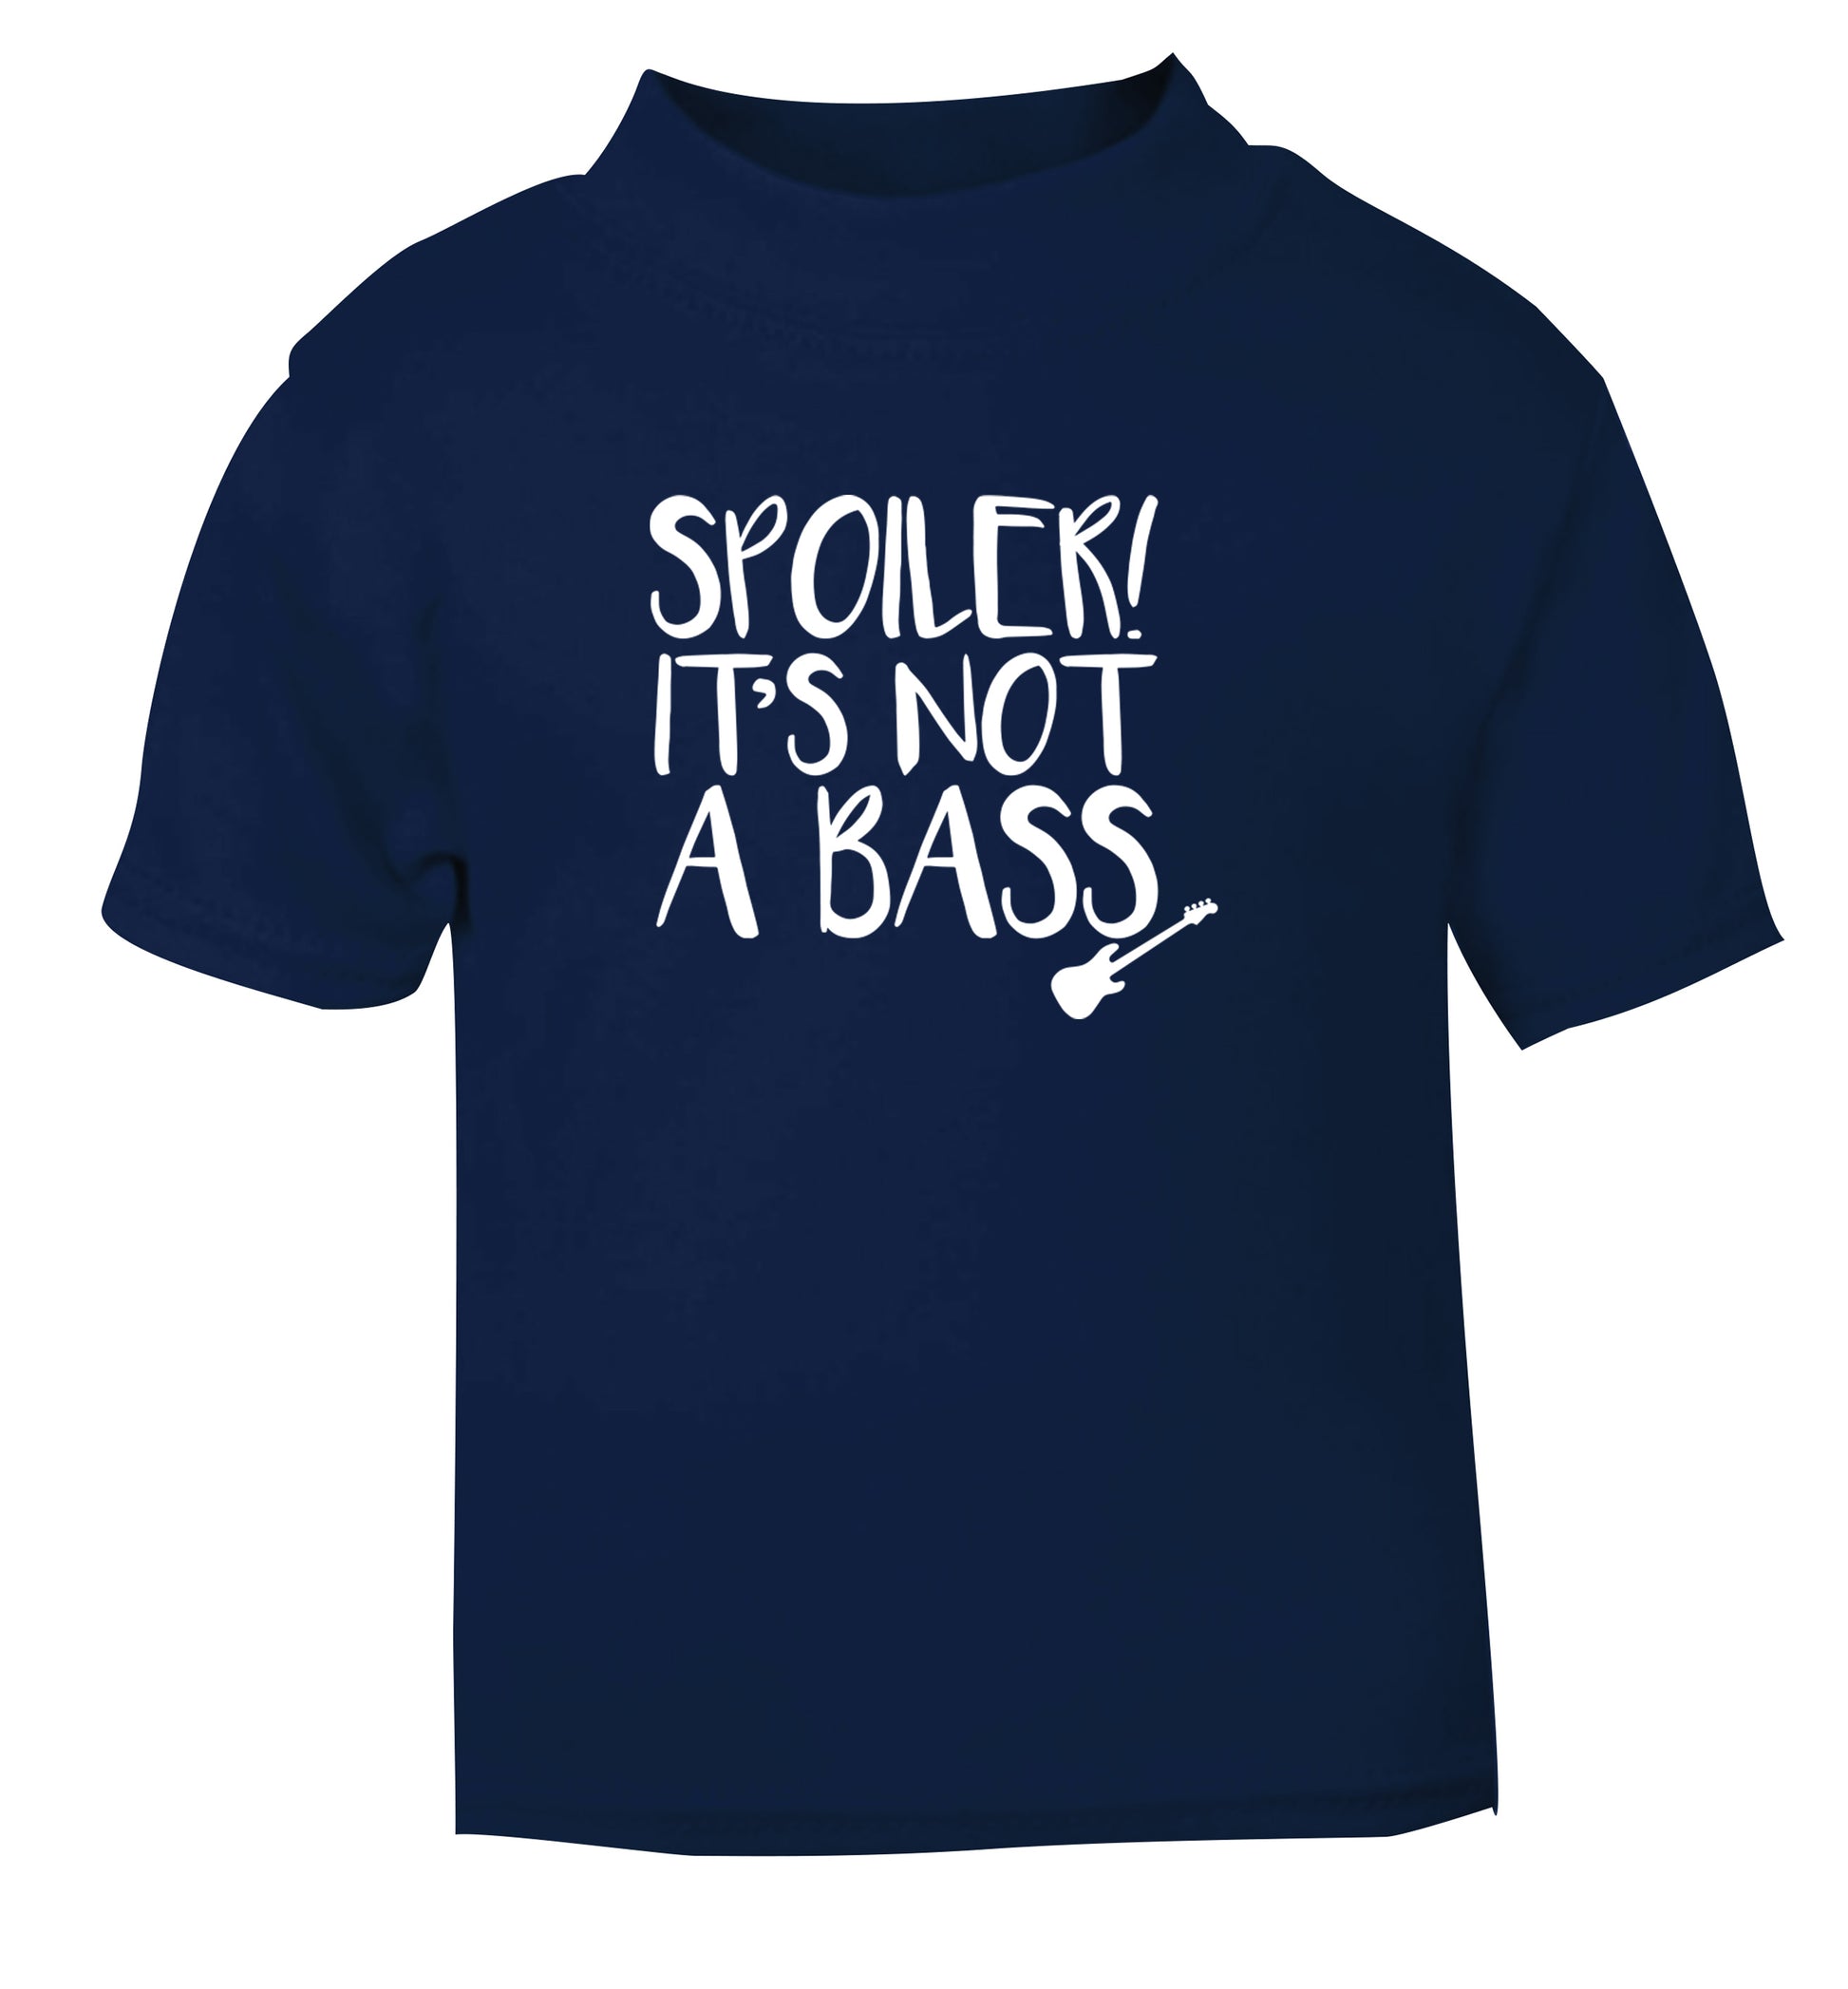 Spoiler it's not a bass navy Baby Toddler Tshirt 2 Years